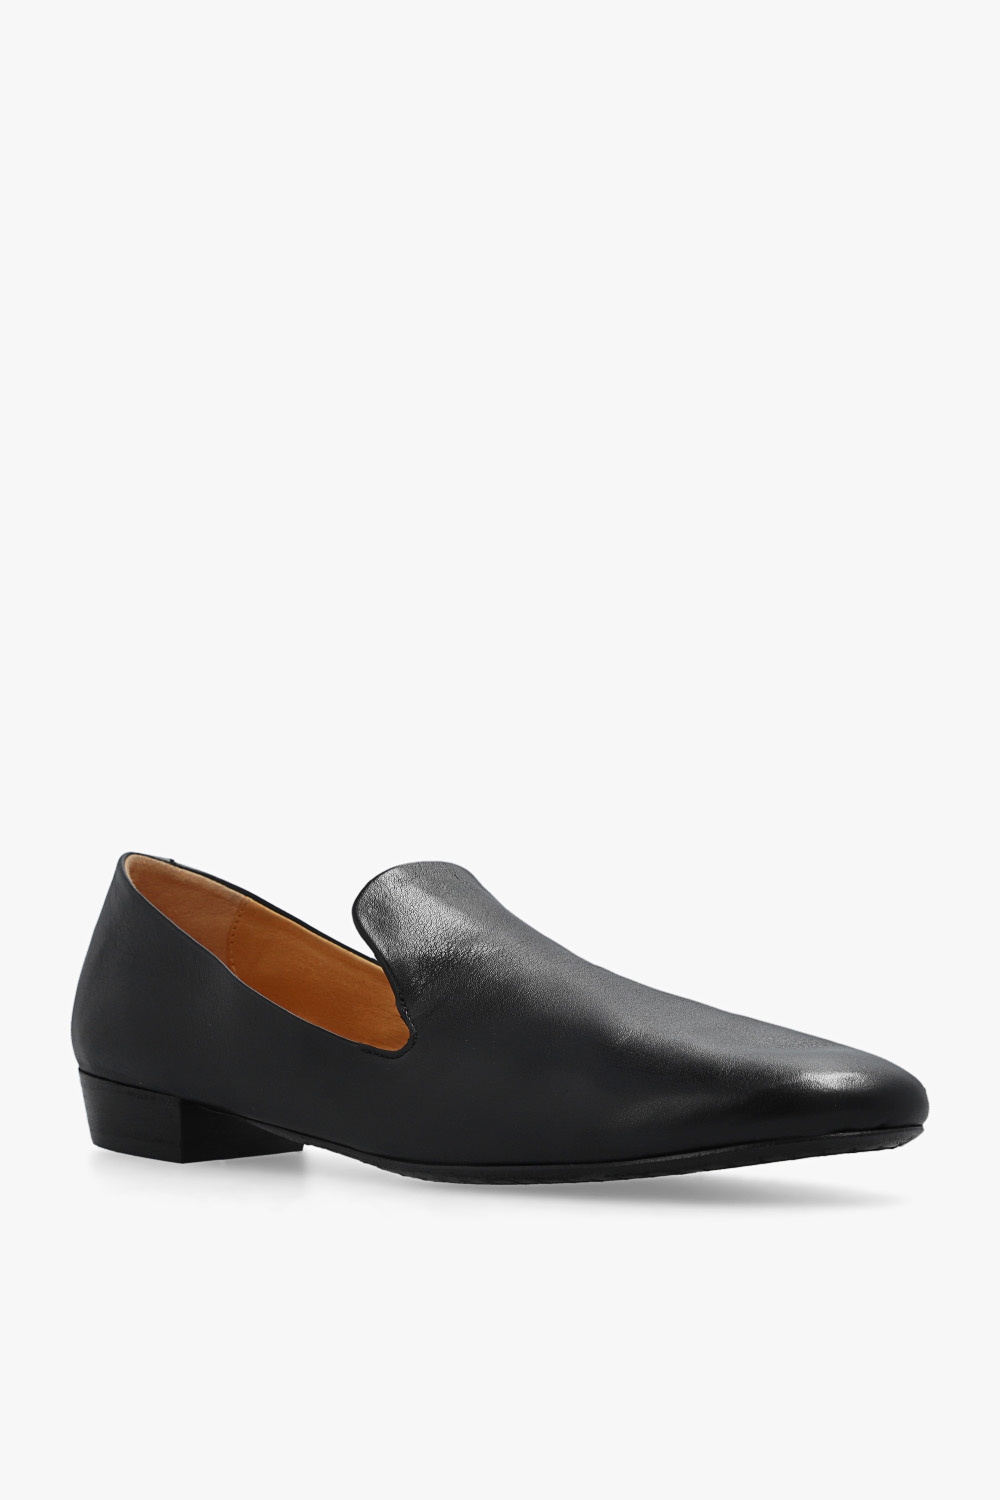 Marsell ‘Coltellino’ leather shoes